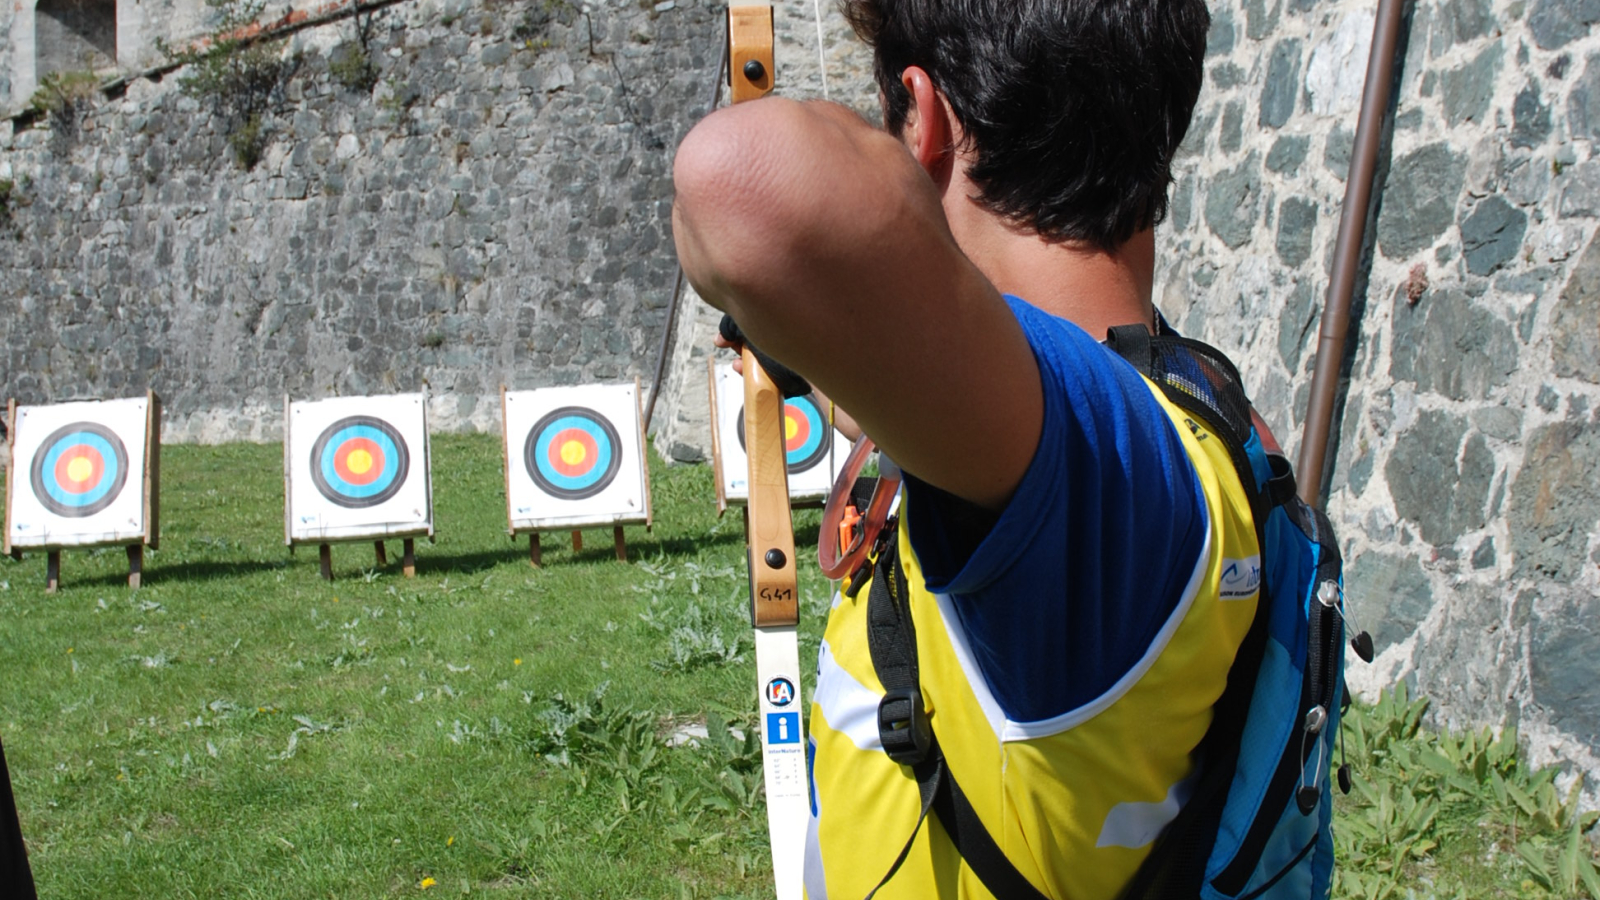 Archery with Objectif Cible